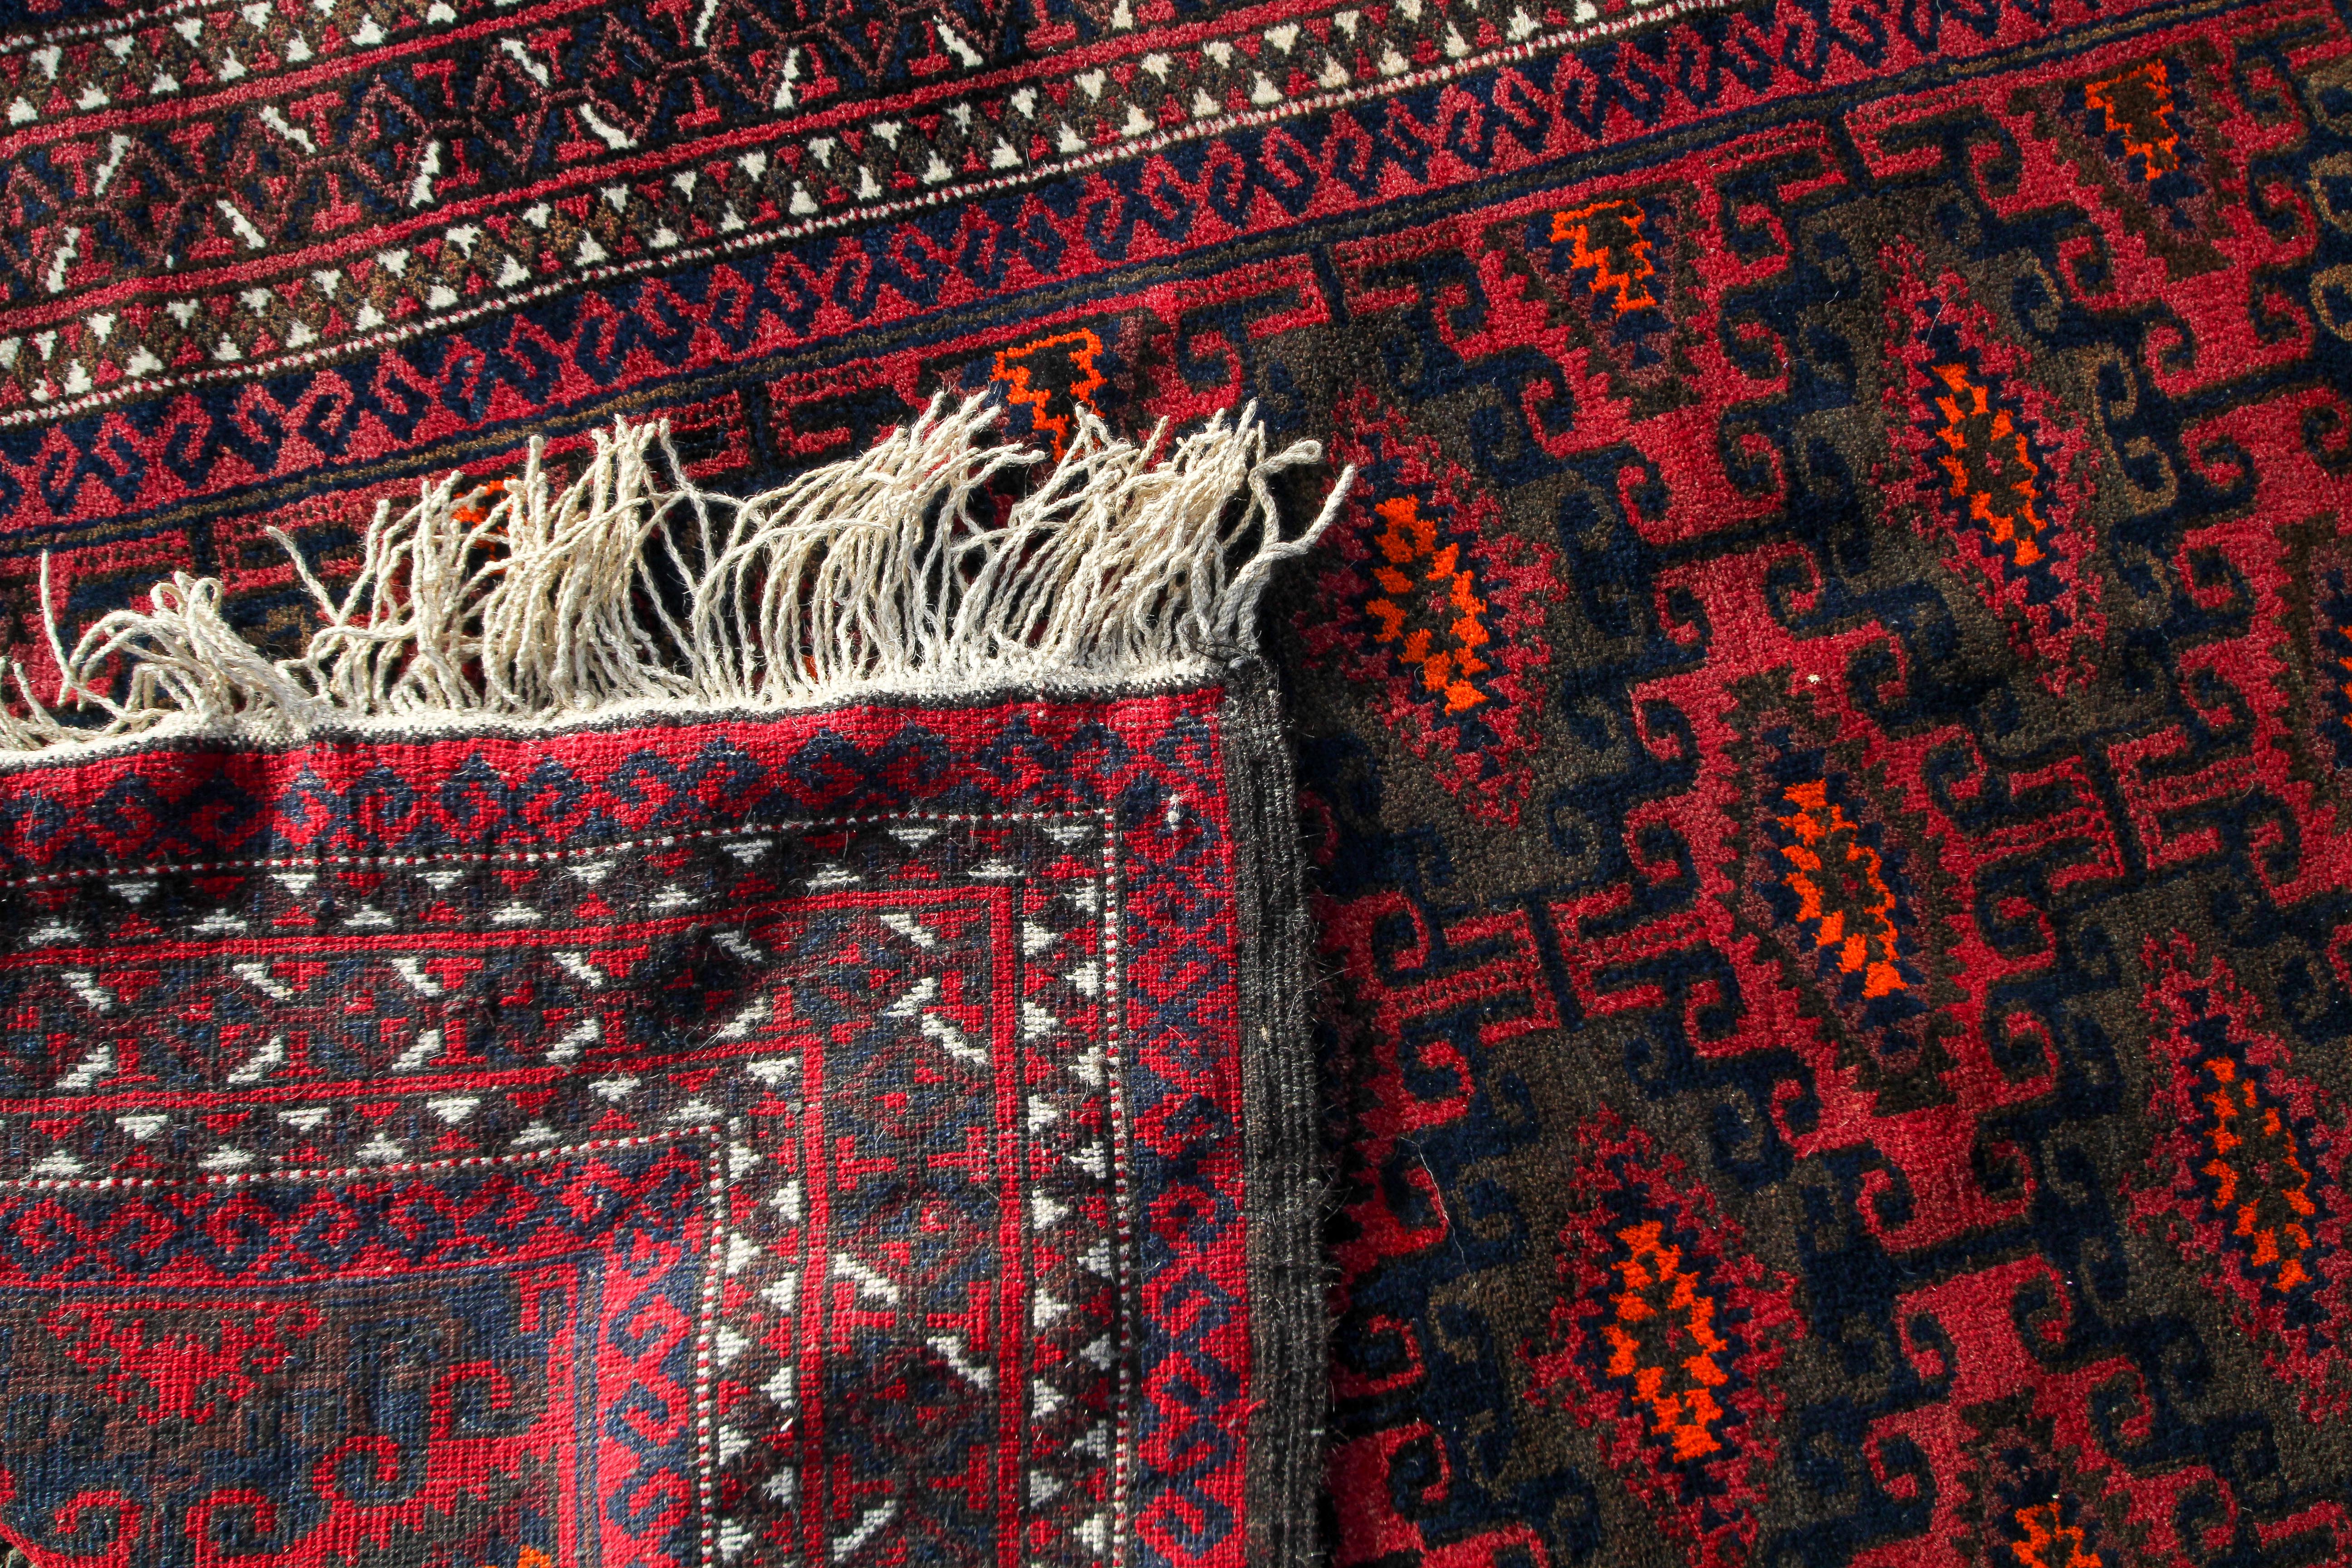 An Afghan carpet, decorated in tones of orange and brown on a predominantly maroon ground, - Image 3 of 3